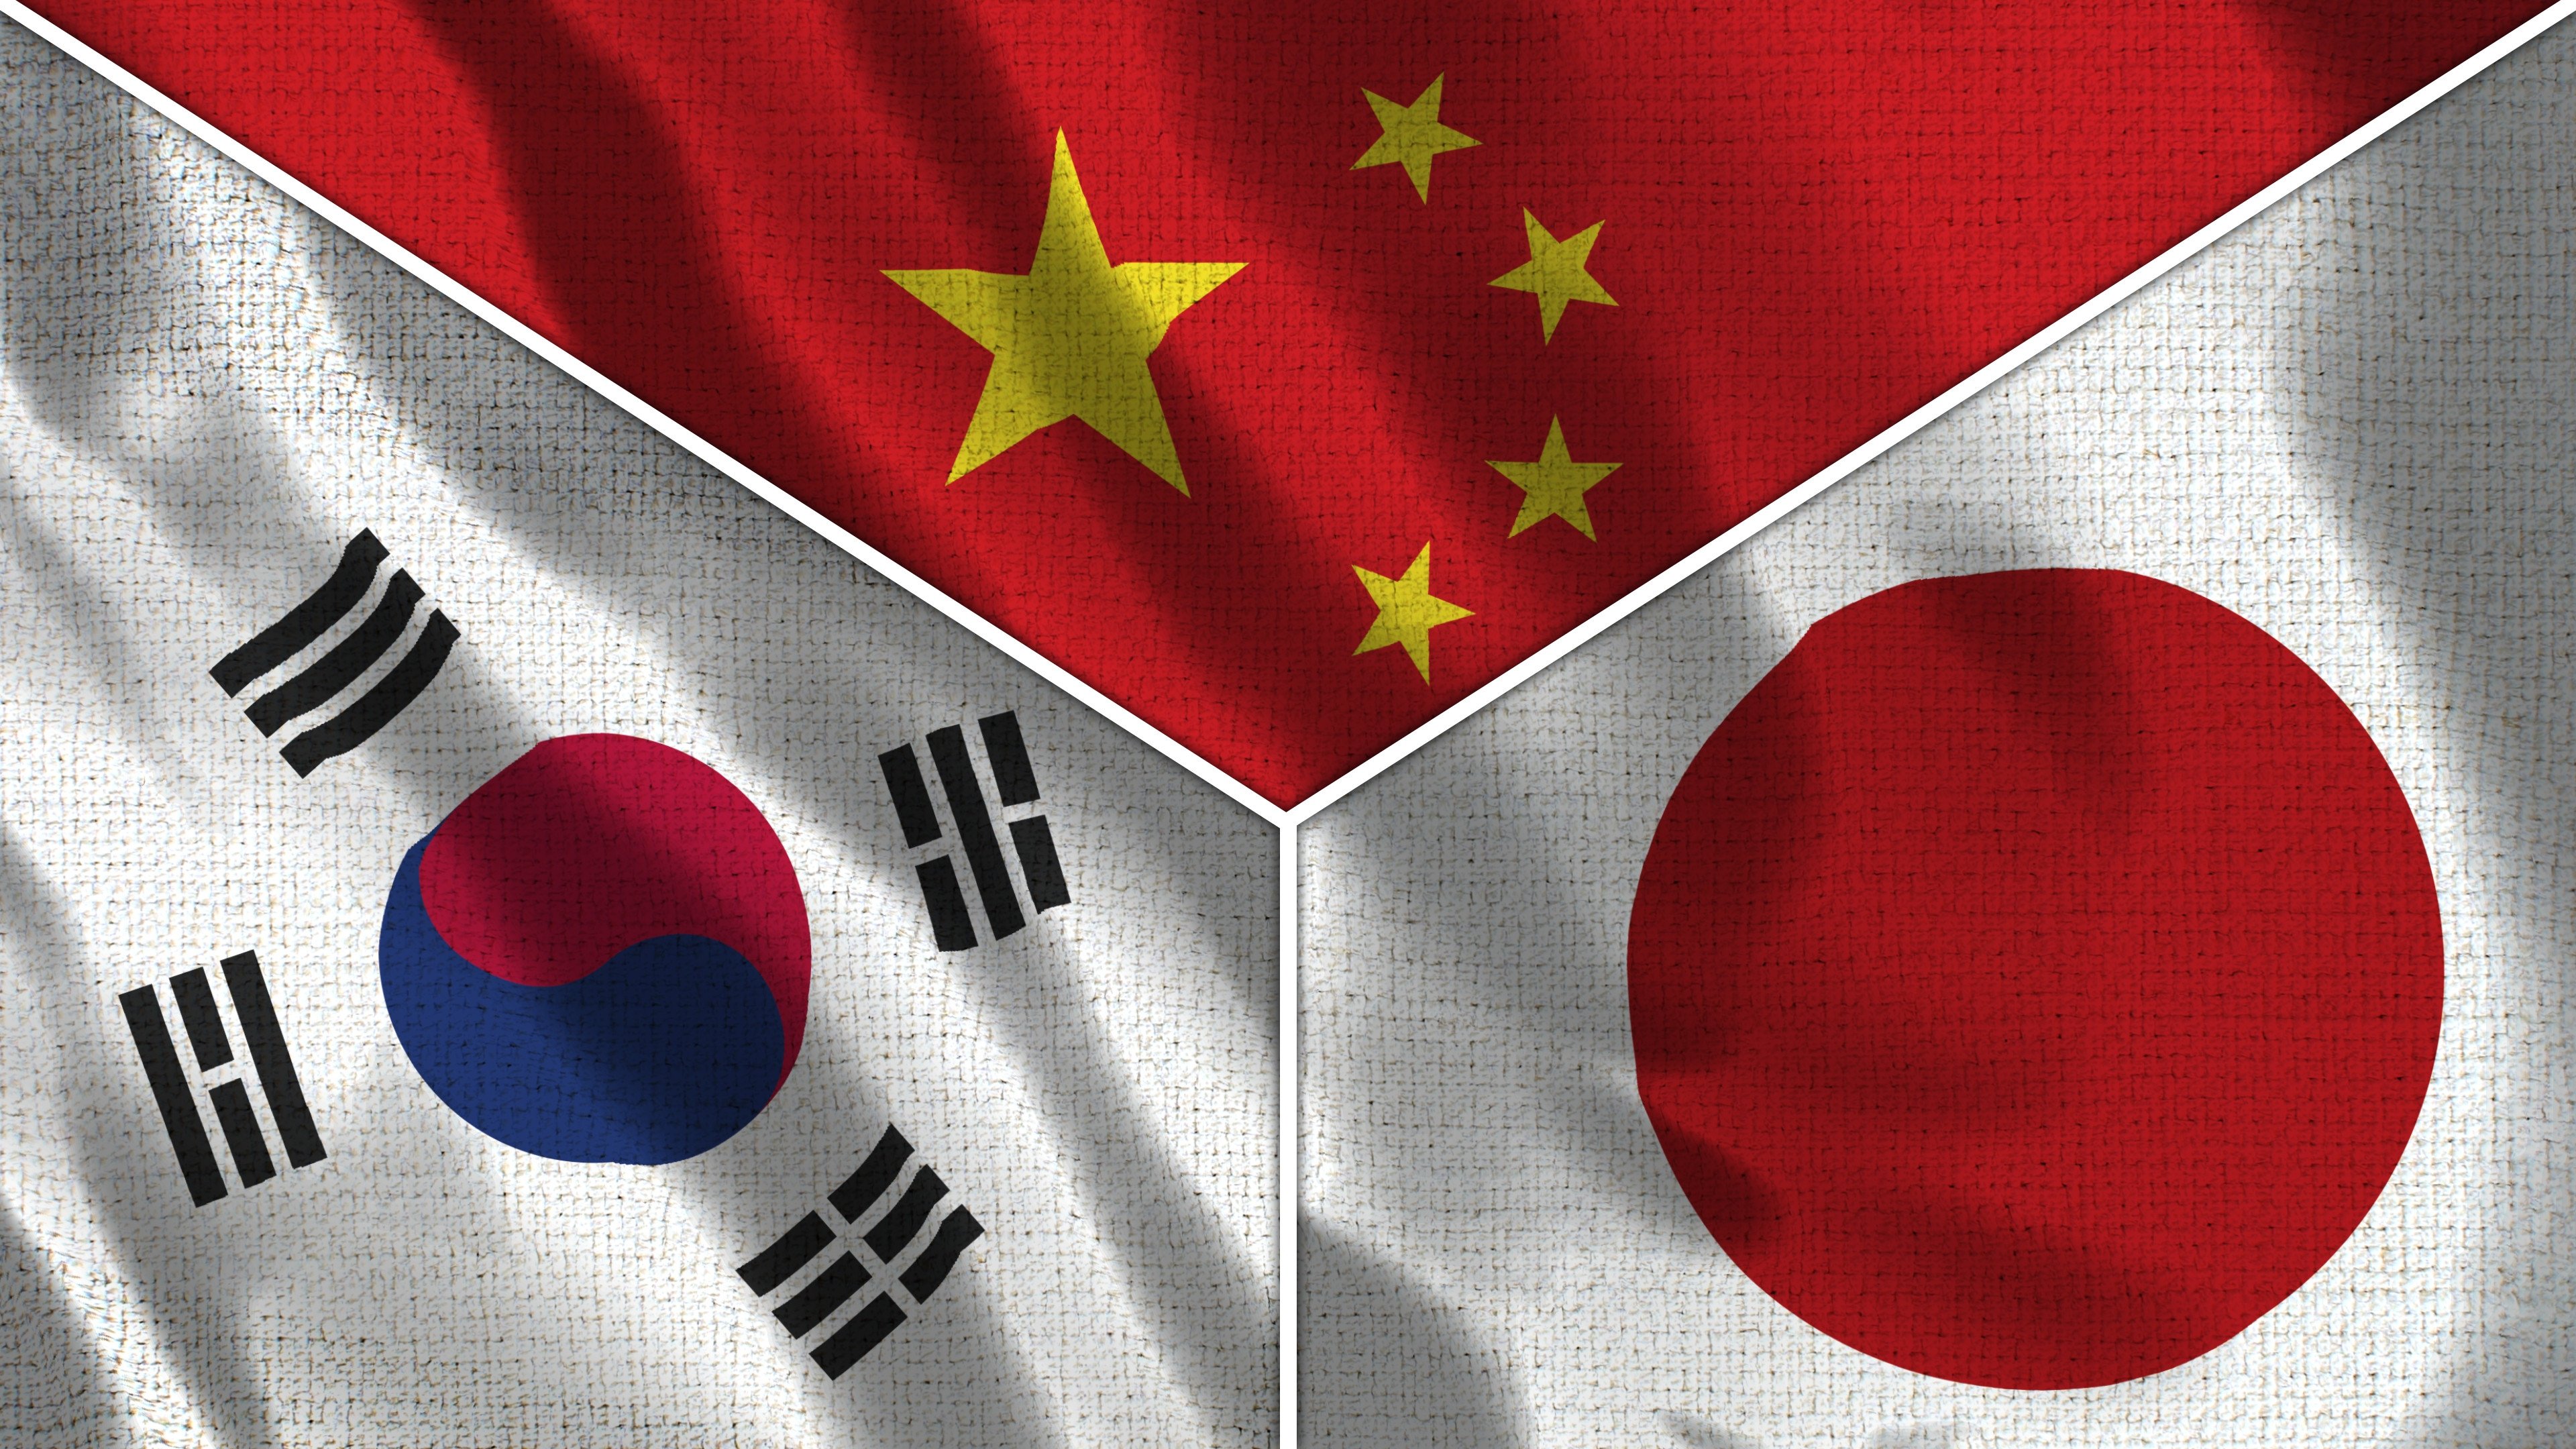 The trilateral meeting between China, South Korea and Japan will take place on Sunday. Photo: Shutterstock Images